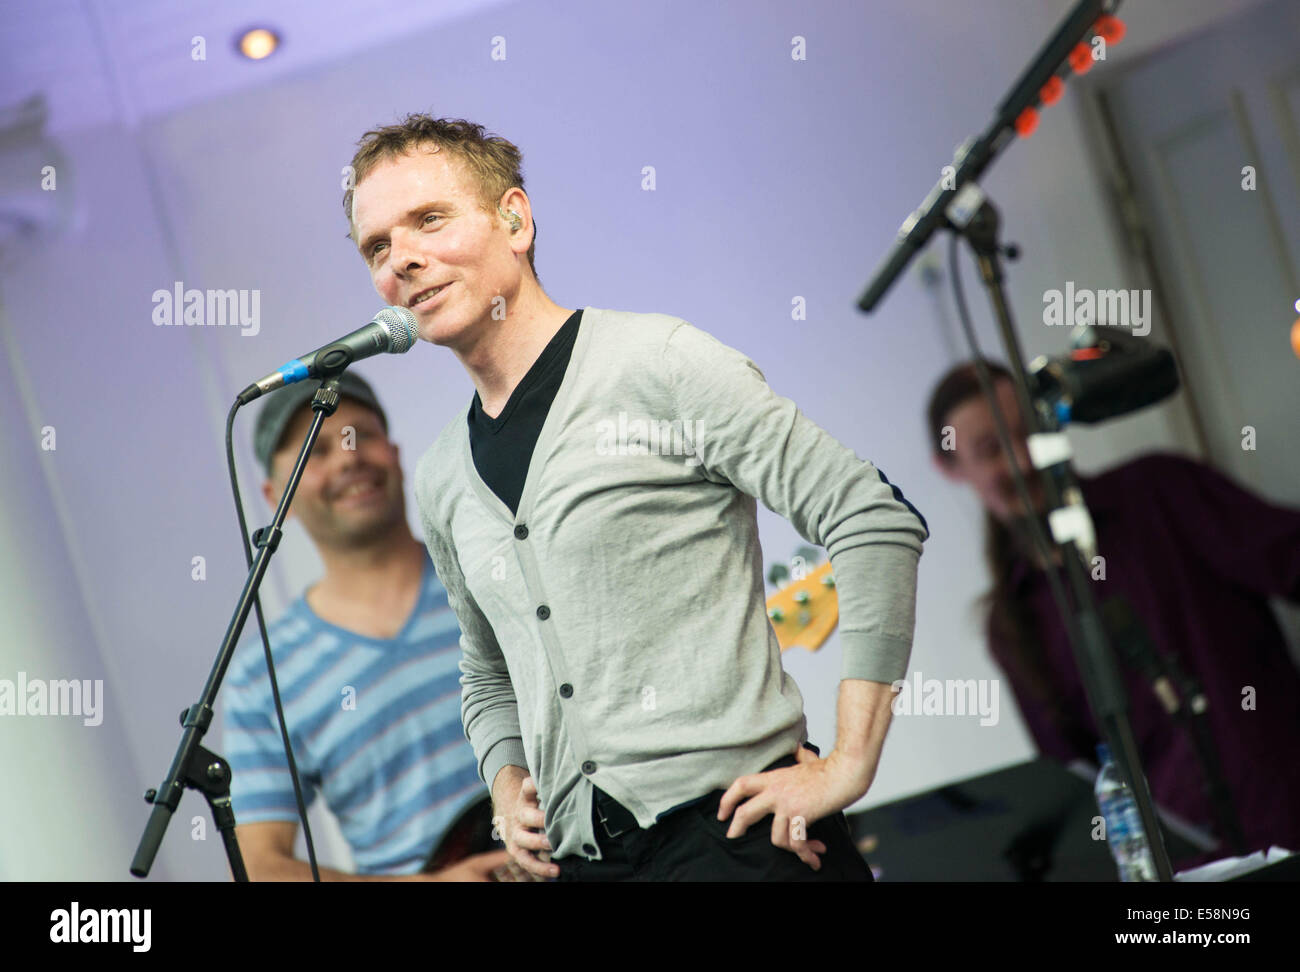 Glasgow, Scotland, UK. 23rd July, 2014. Stuart Murdoch of Belle and Sebastian performs at the kelvingrove bandstand as part of opening celebrations of the Glasgow Commonwealth Games 2014. Glasgow Scotland July 23rd. Credit:  Sam Kovak/Alamy Live News Stock Photo